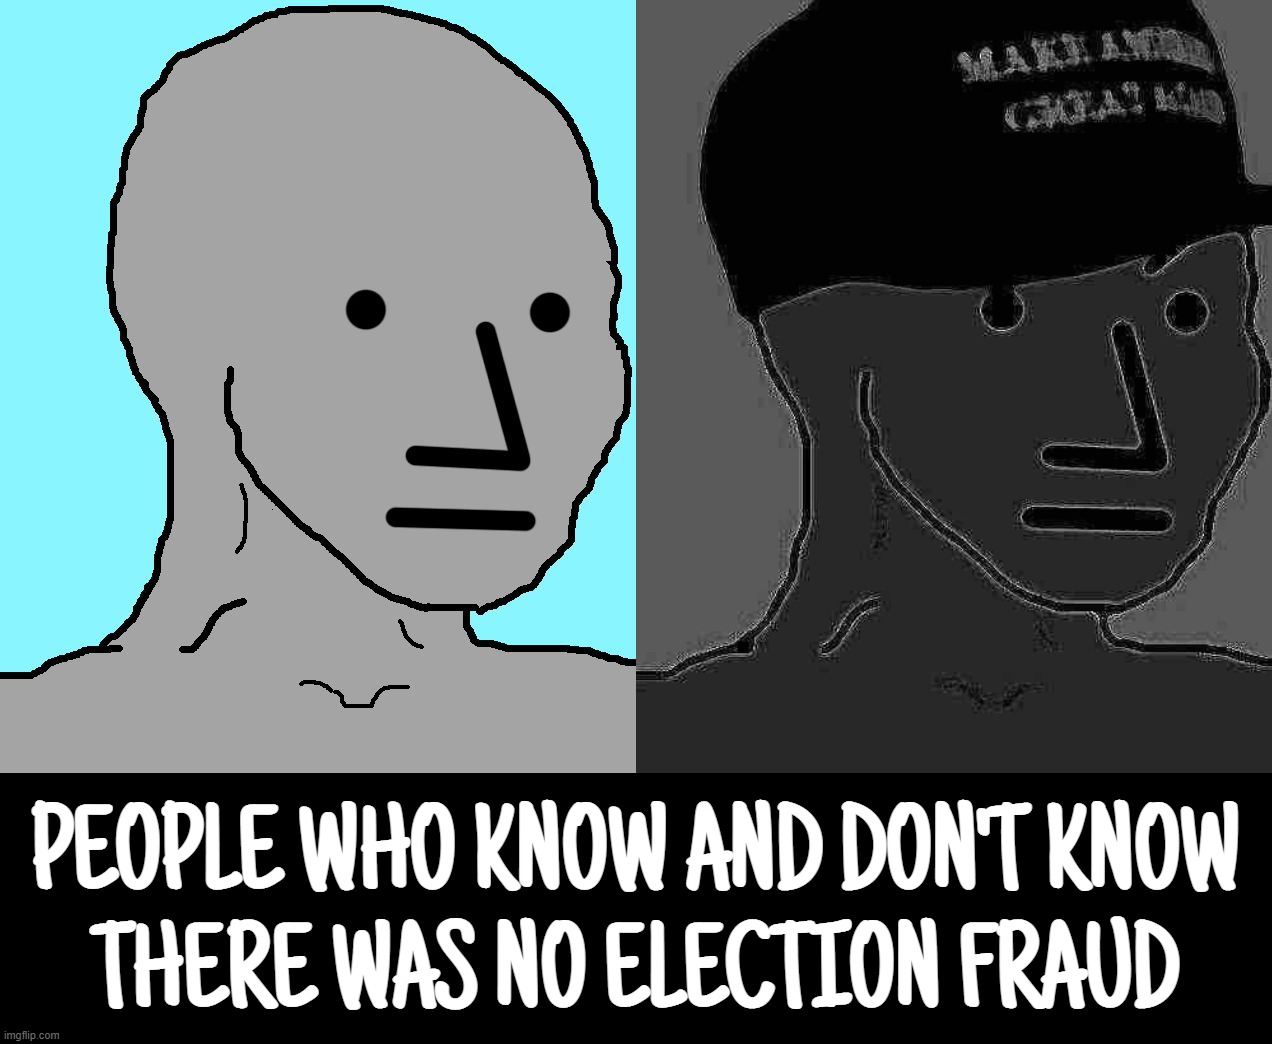 if ya dont know, now ya know... | PEOPLE WHO KNOW AND DON'T KNOW
THERE WAS NO ELECTION FRAUD | image tagged in memes,npc,we are not the same | made w/ Imgflip meme maker